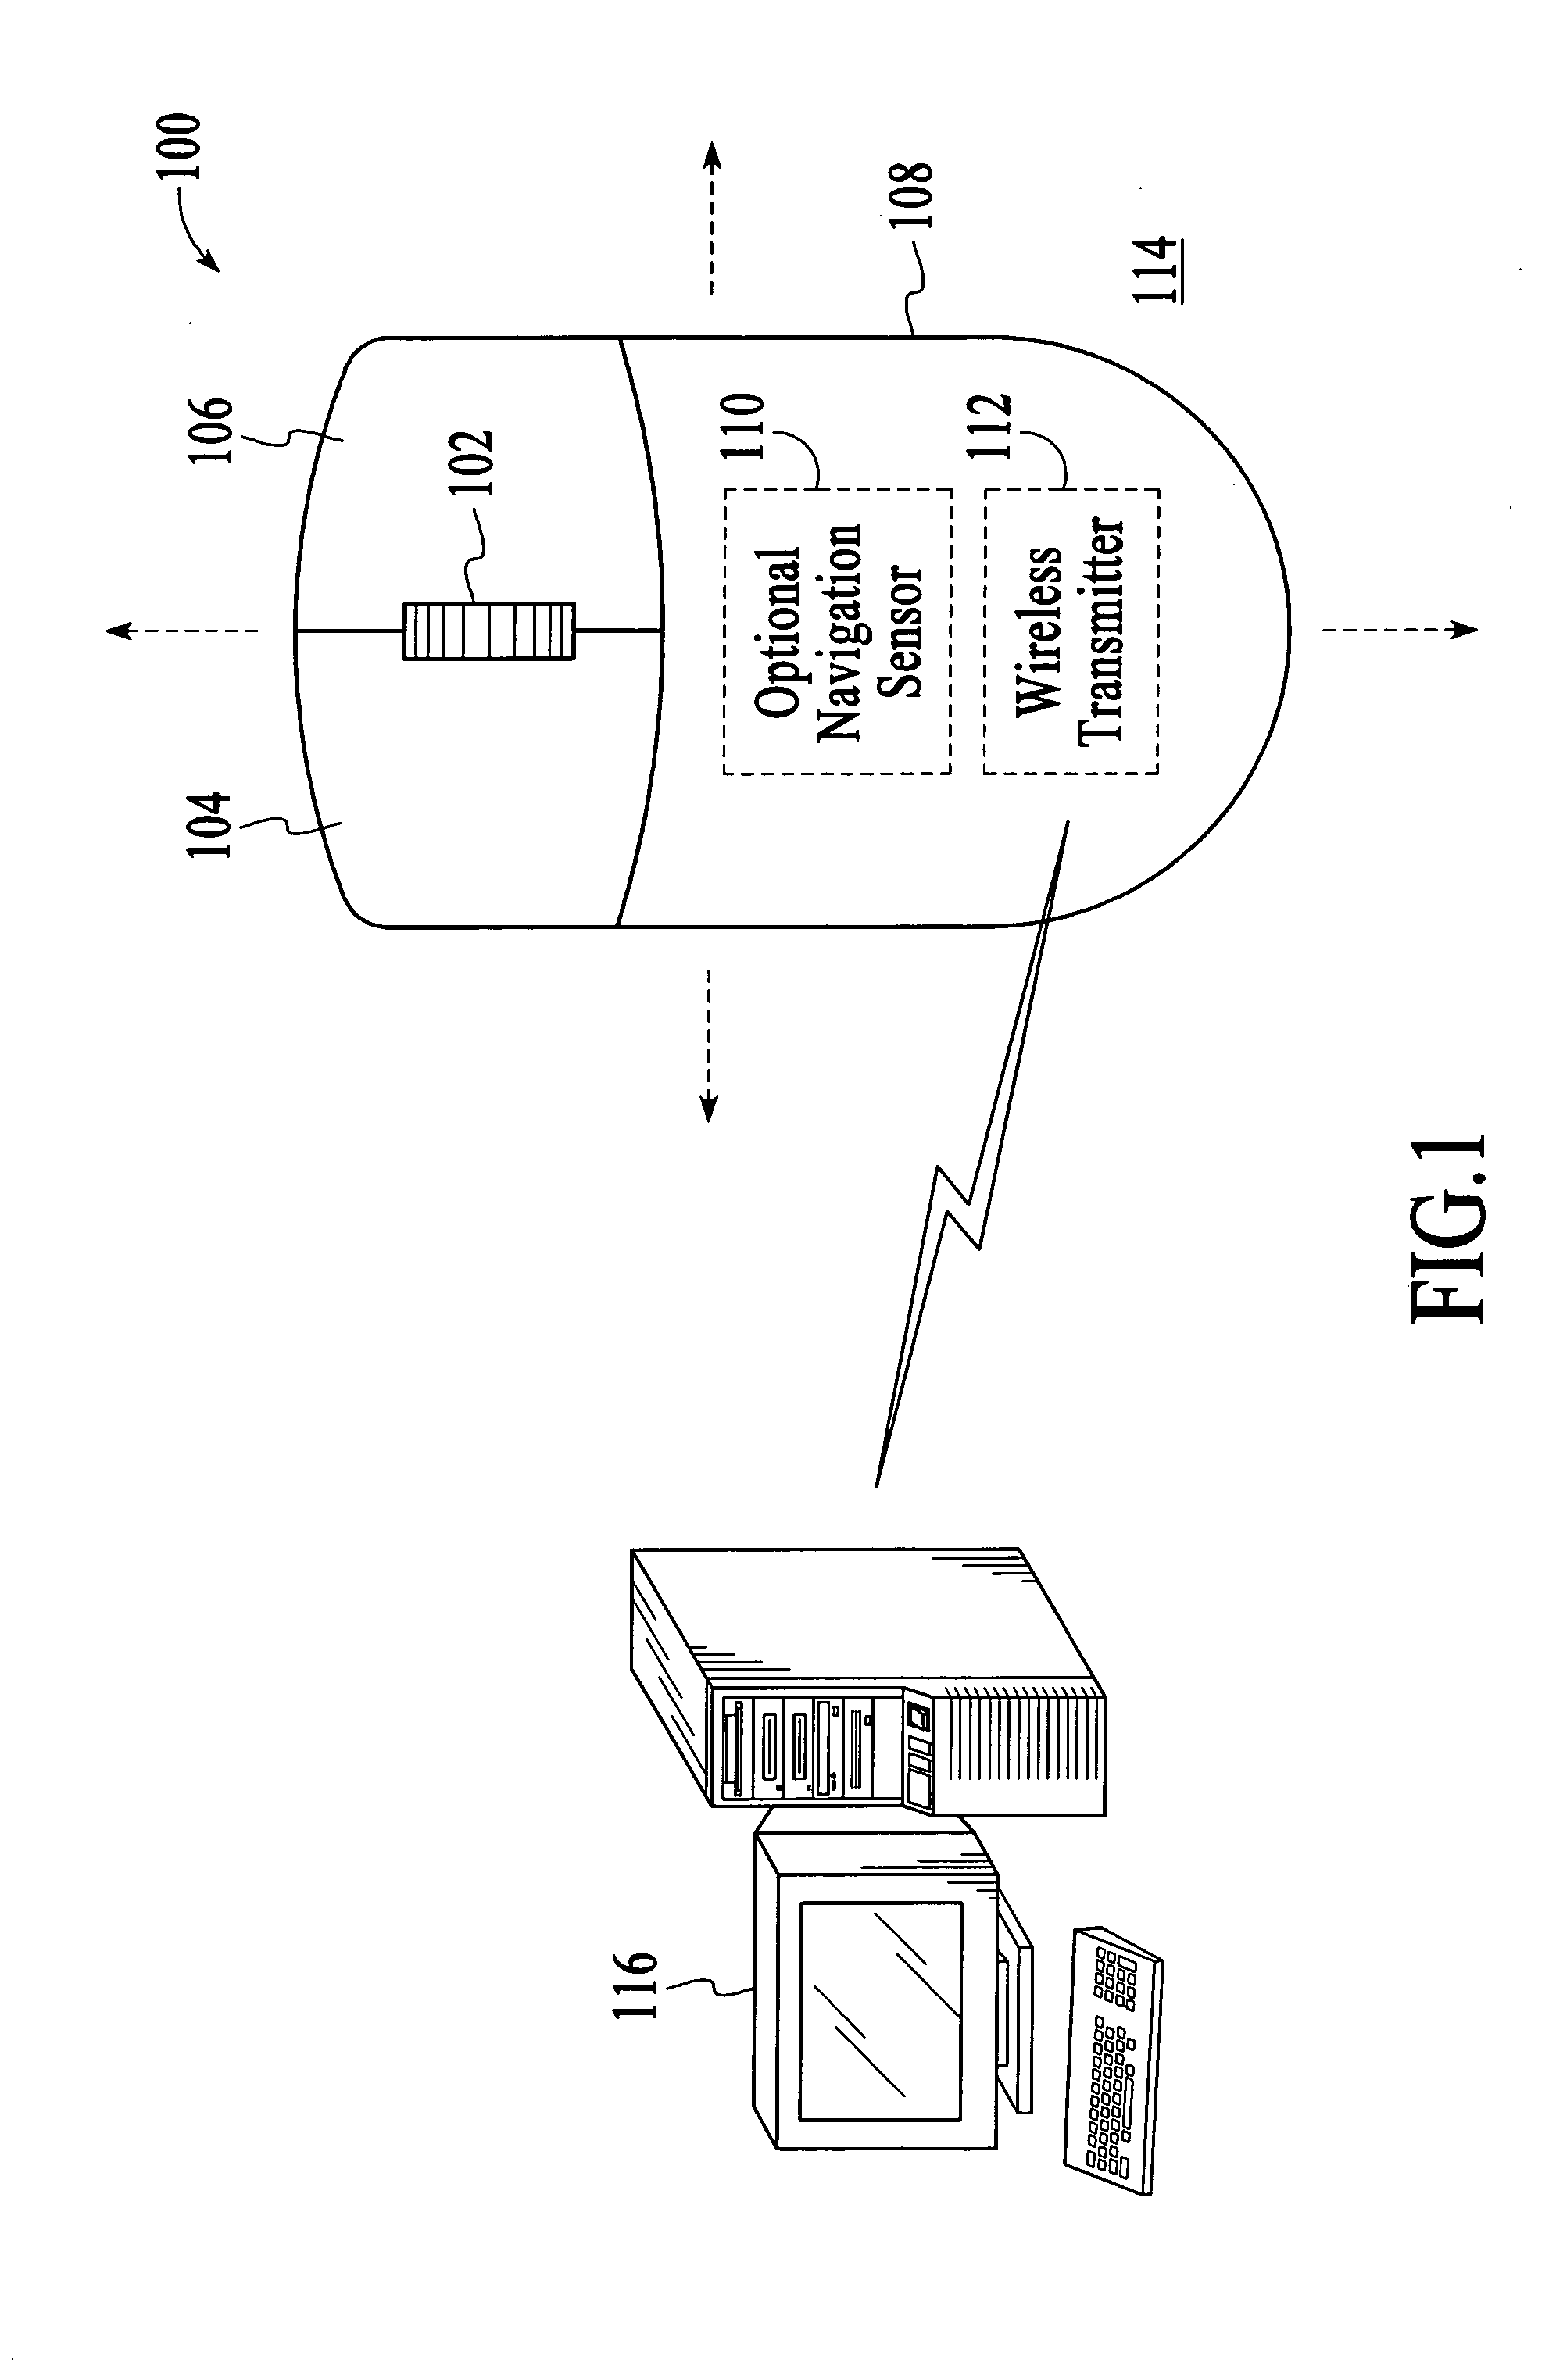 Optical navigation system and method for reducing the power consumption of the system